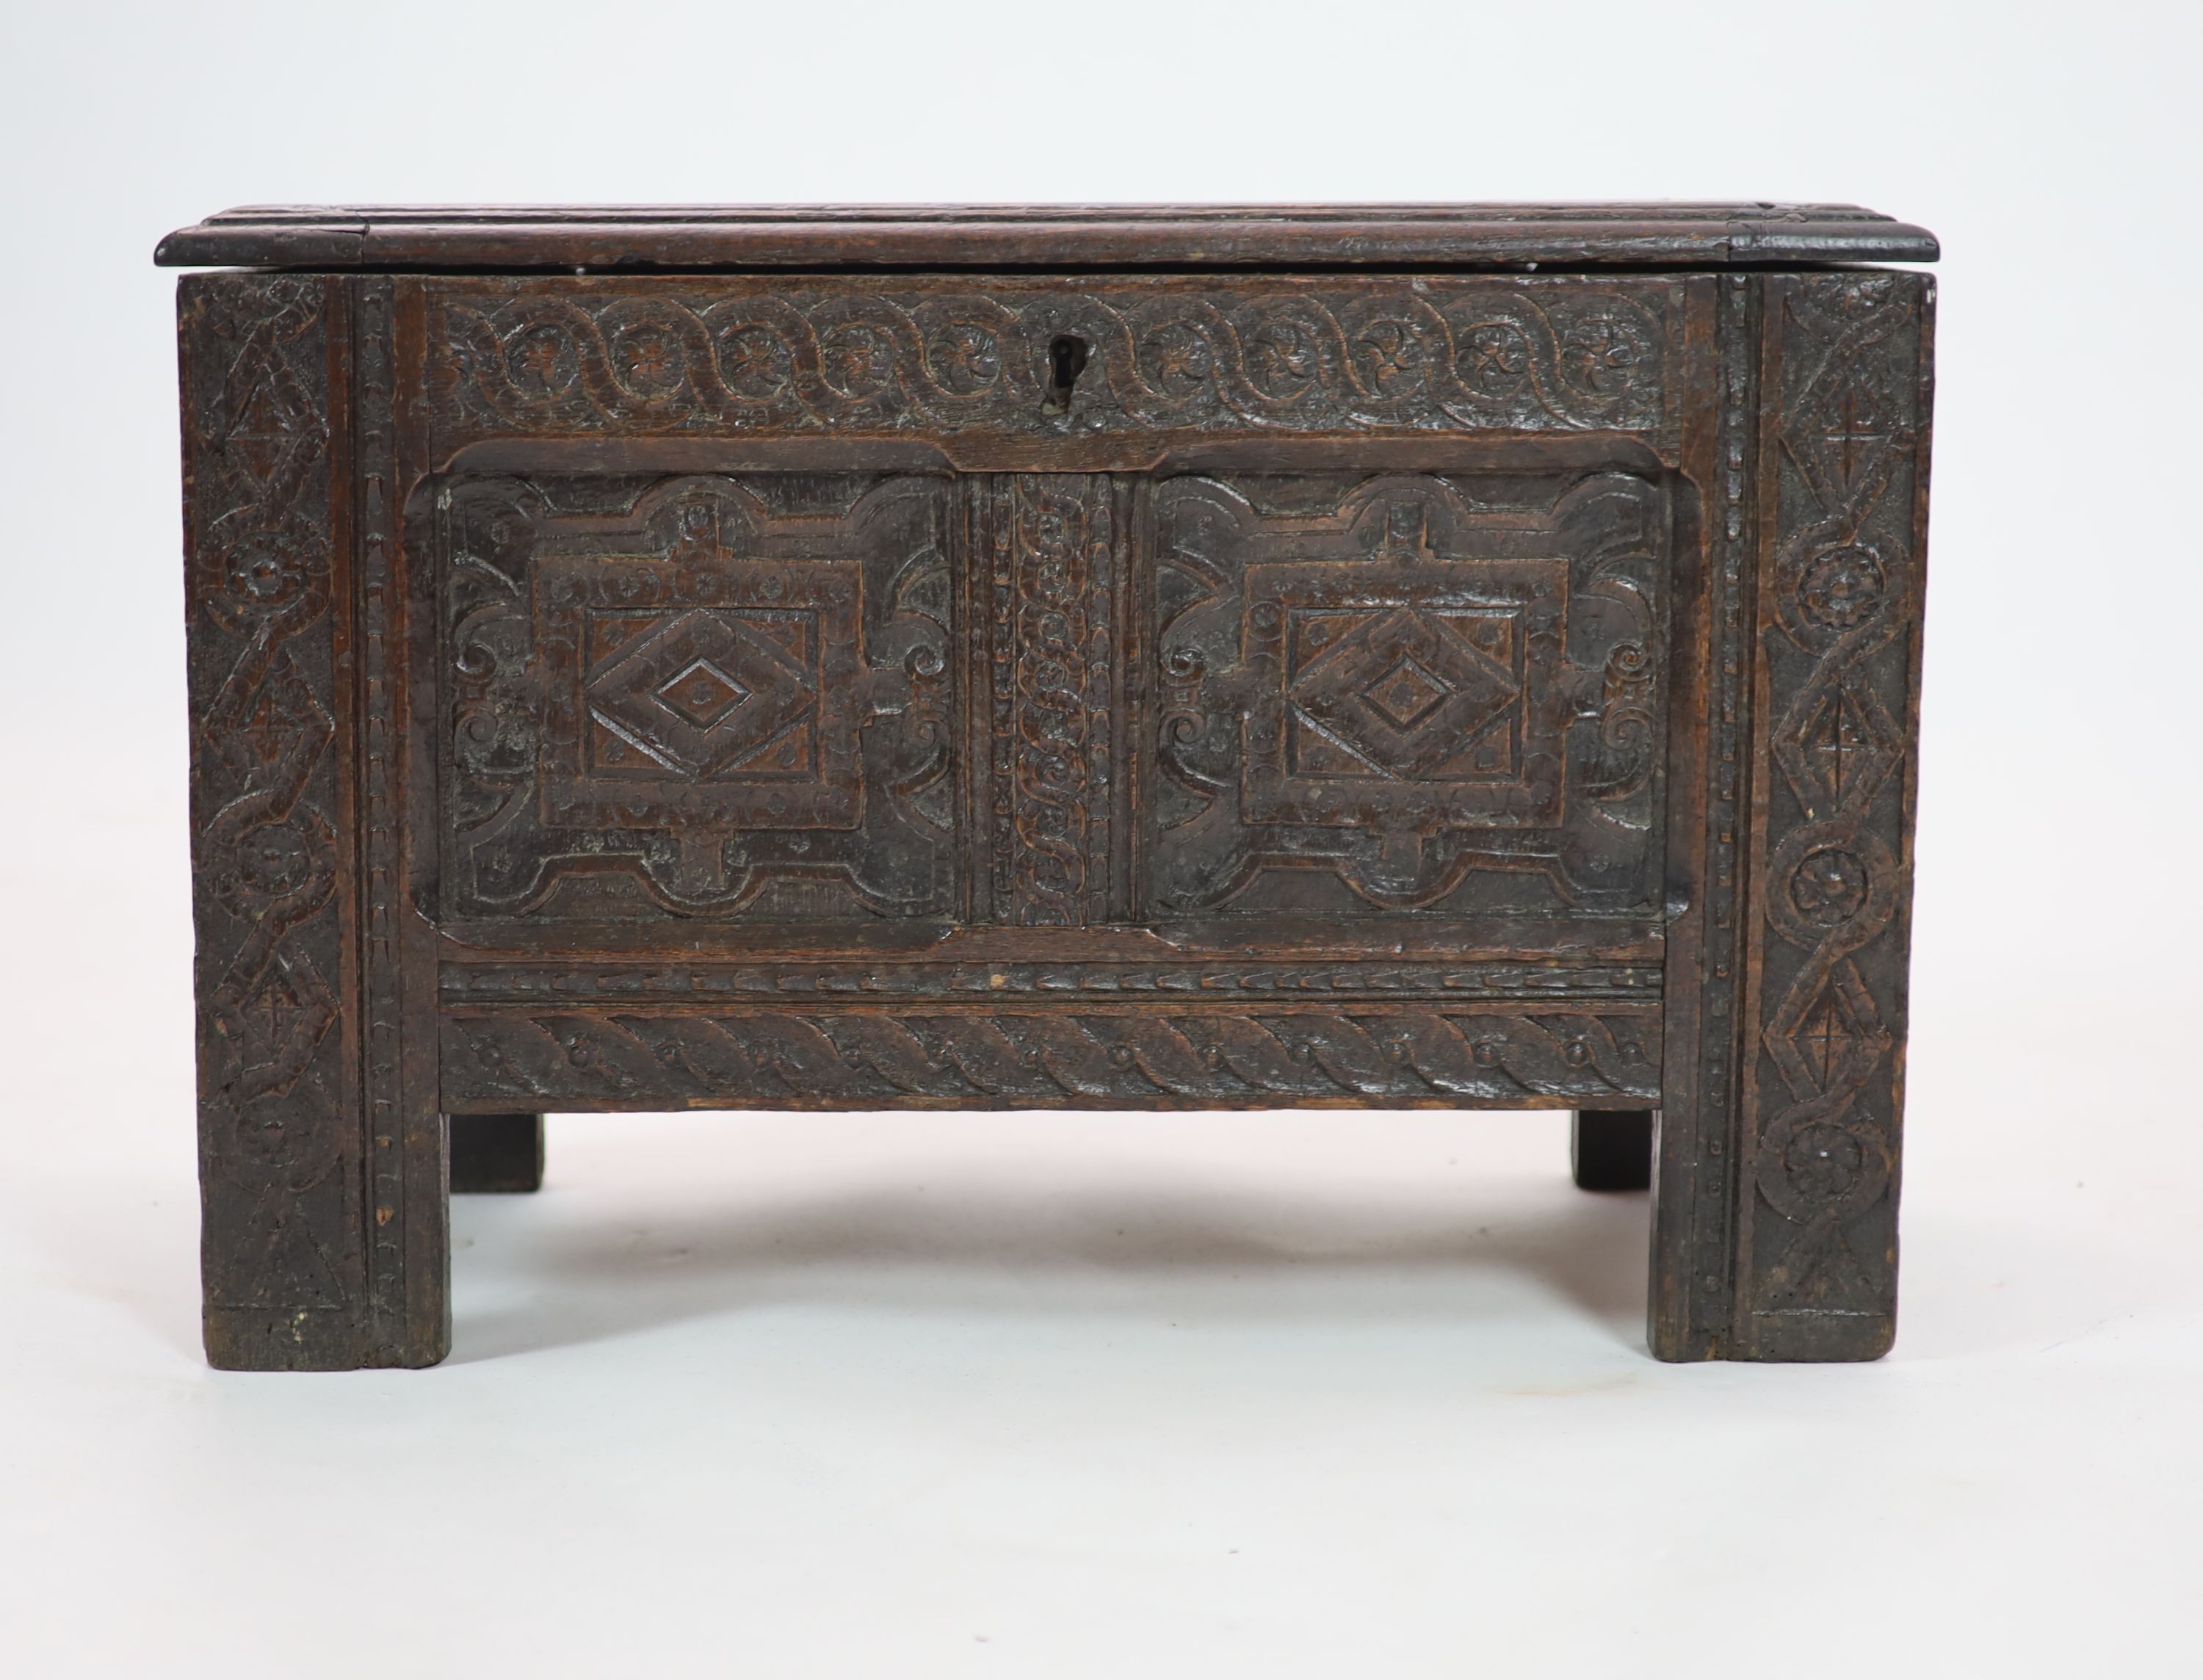 A late 17th/early 18th century small oak coffer (possibly West Country) the panelled front with Renaissance style carving H 46cm. W 70cm. D 34cm.